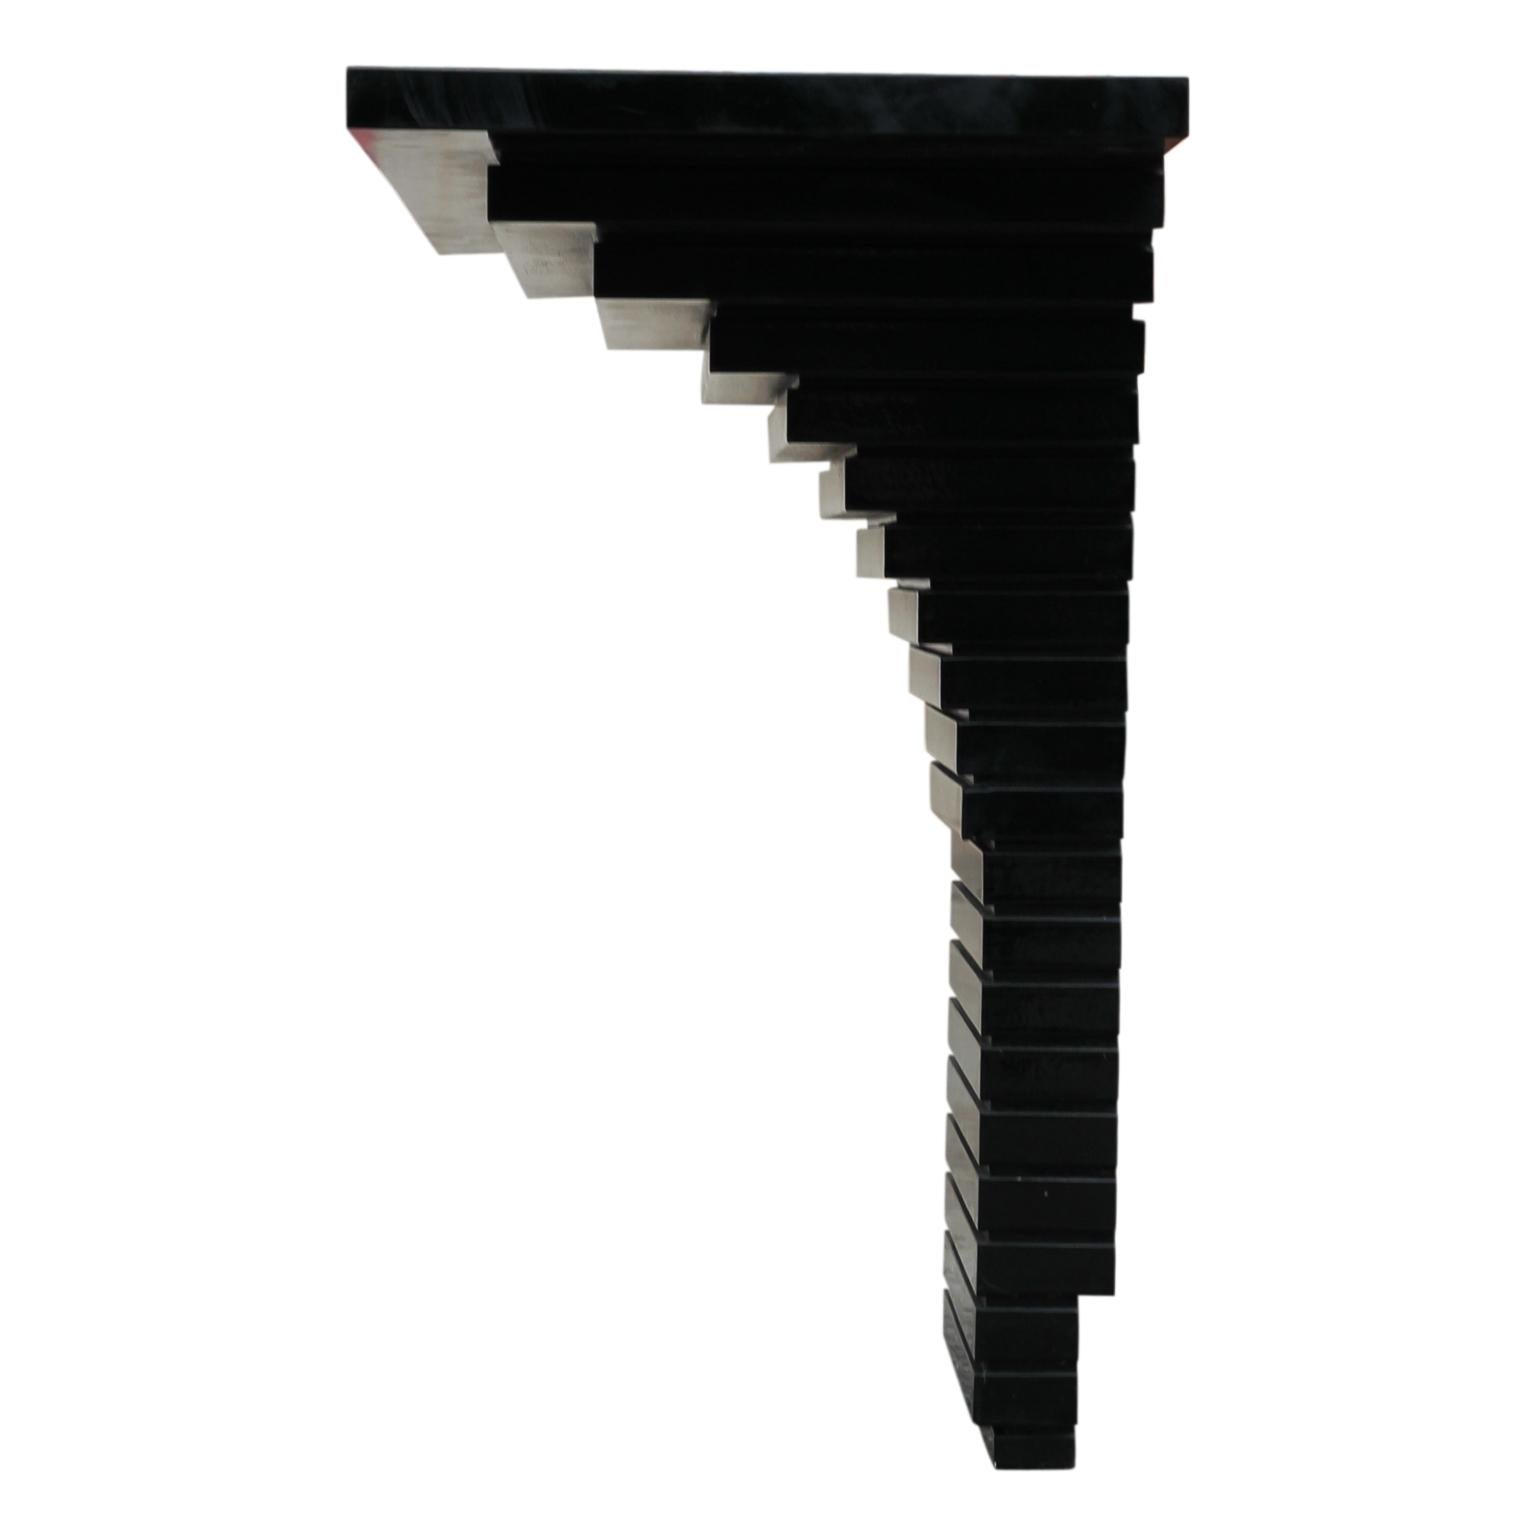 Modern black console entry way table with a layered geometric shape. The paint is a high gloss black and can be redone for an additional cost.